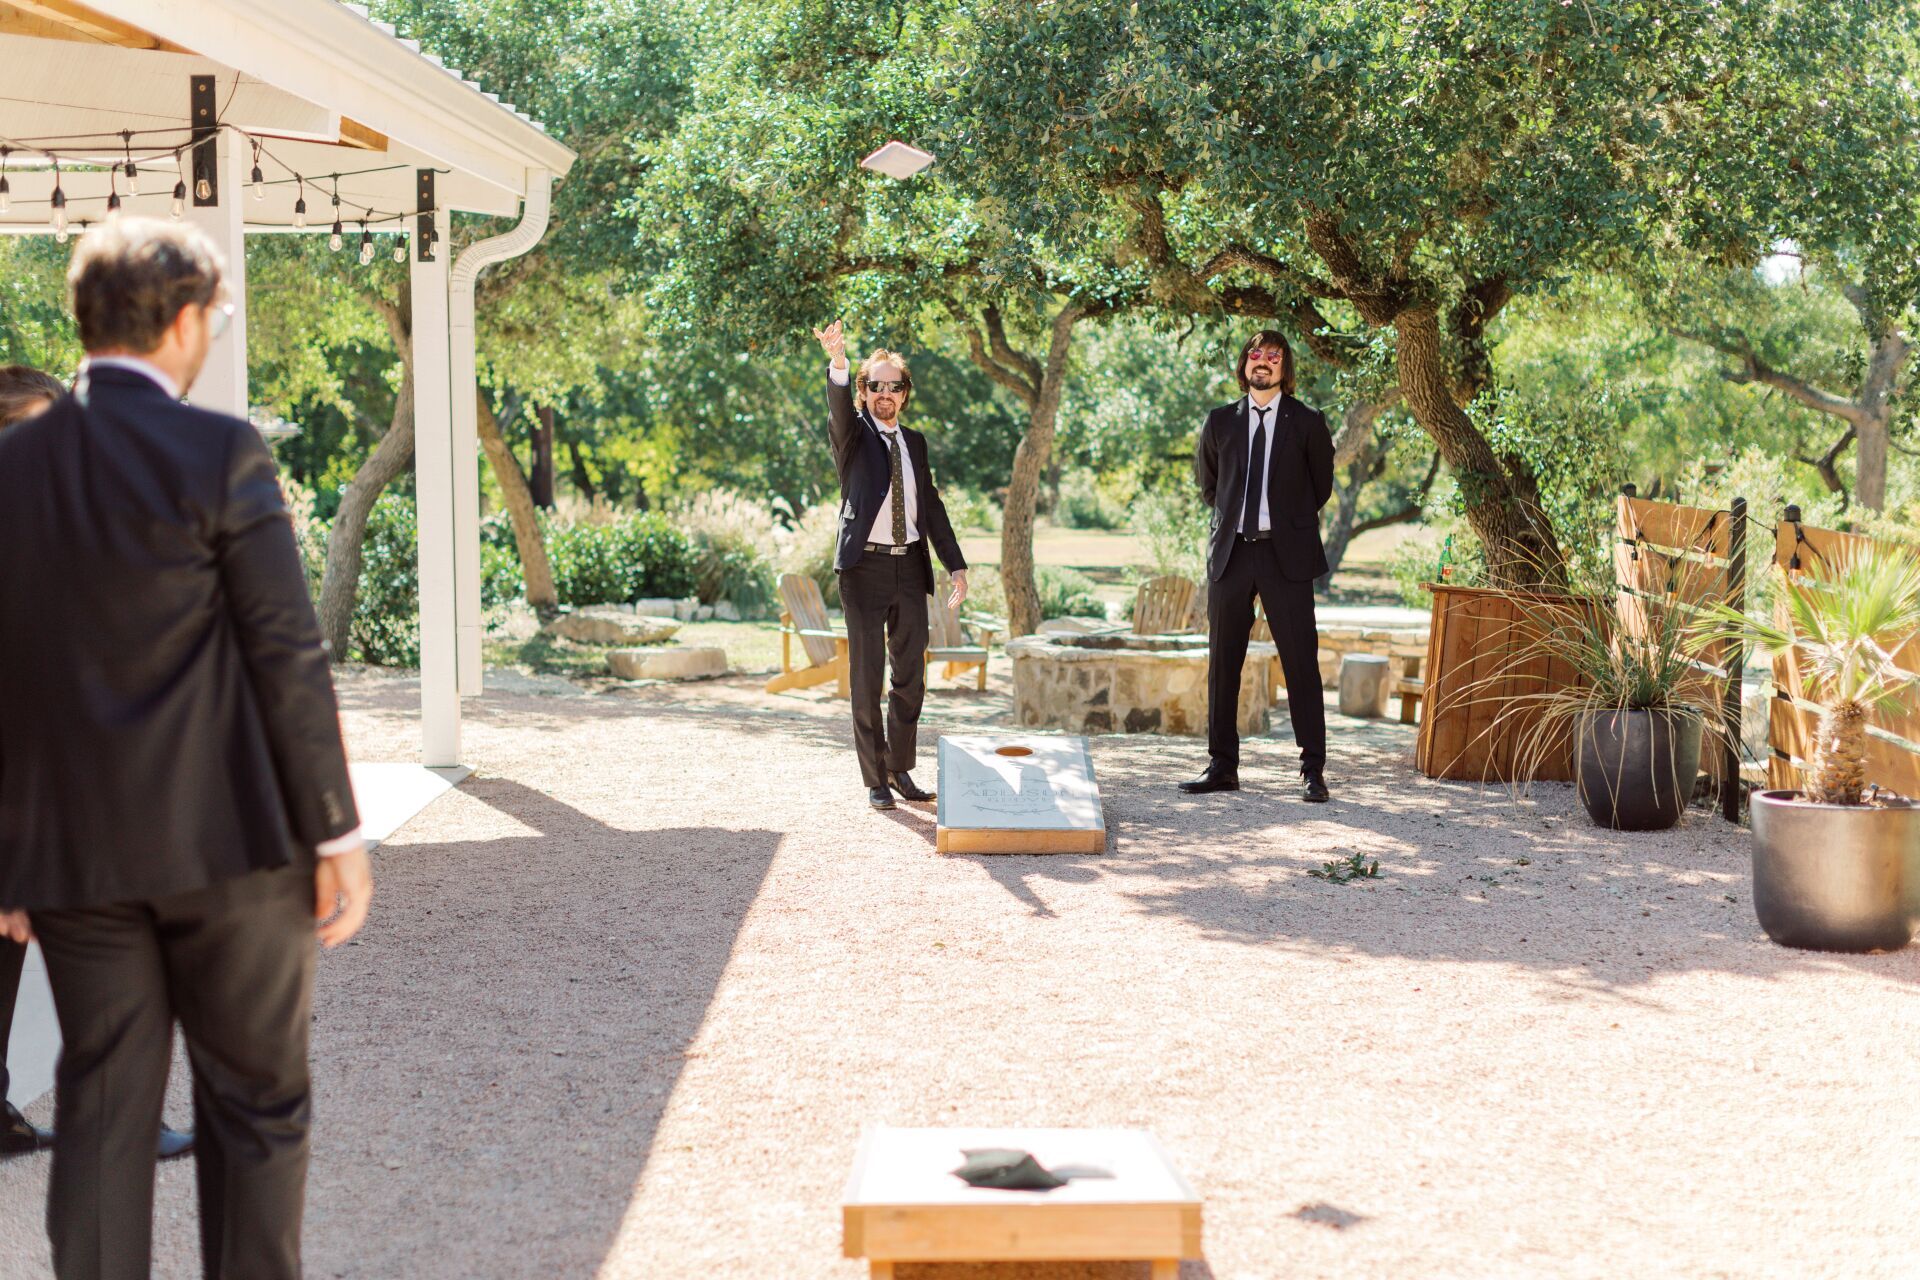 In-House Lawn Games Cornhole at The Addison Grove Austin, Texas Wedding Venue in Hill Country Texas